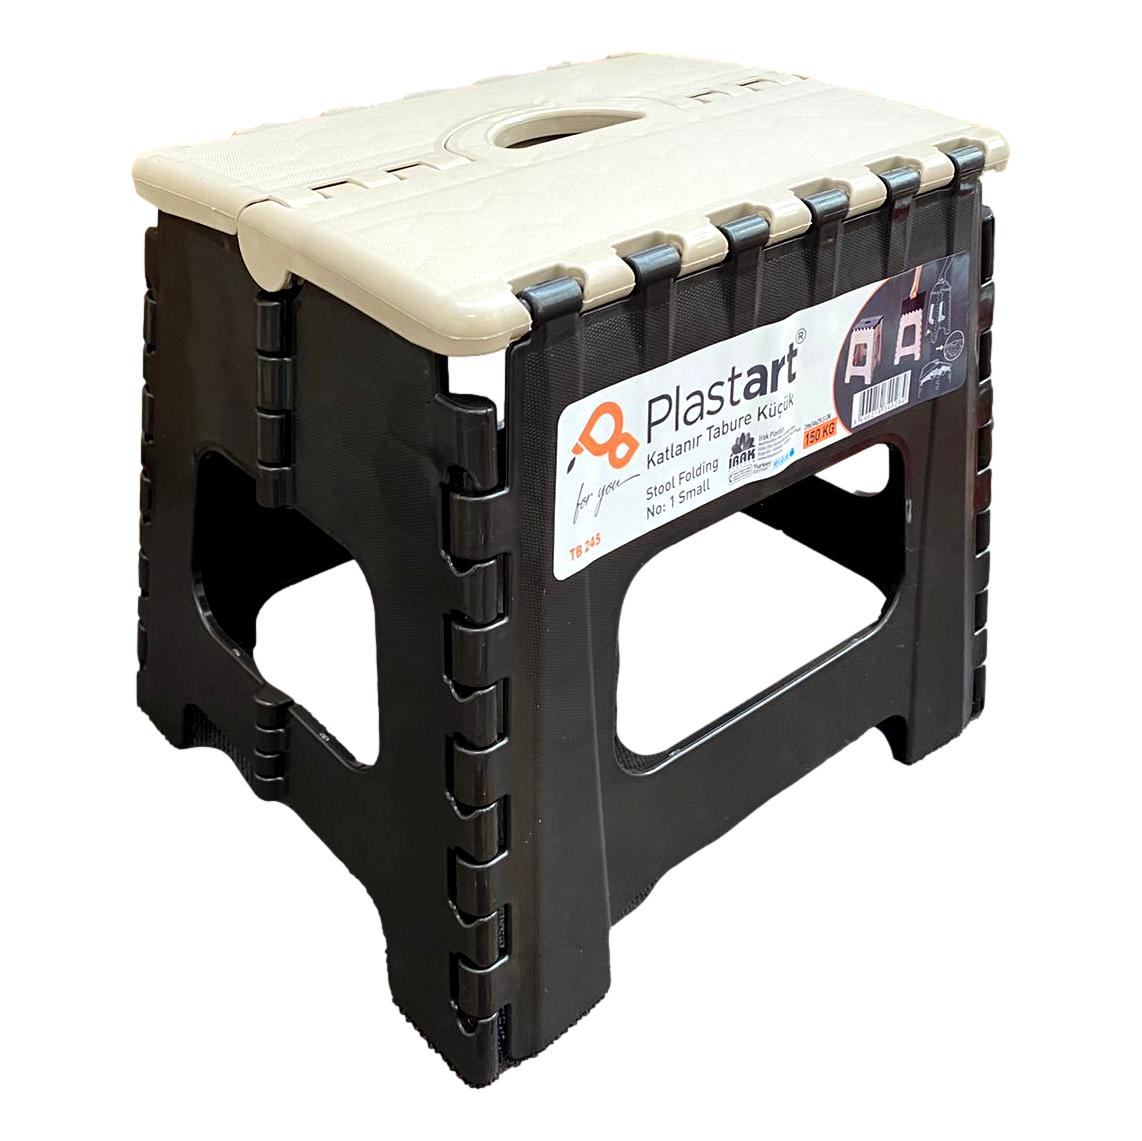 Folding Step Stool for Adults, Children with Rubber Grips Holds up to 150 KG